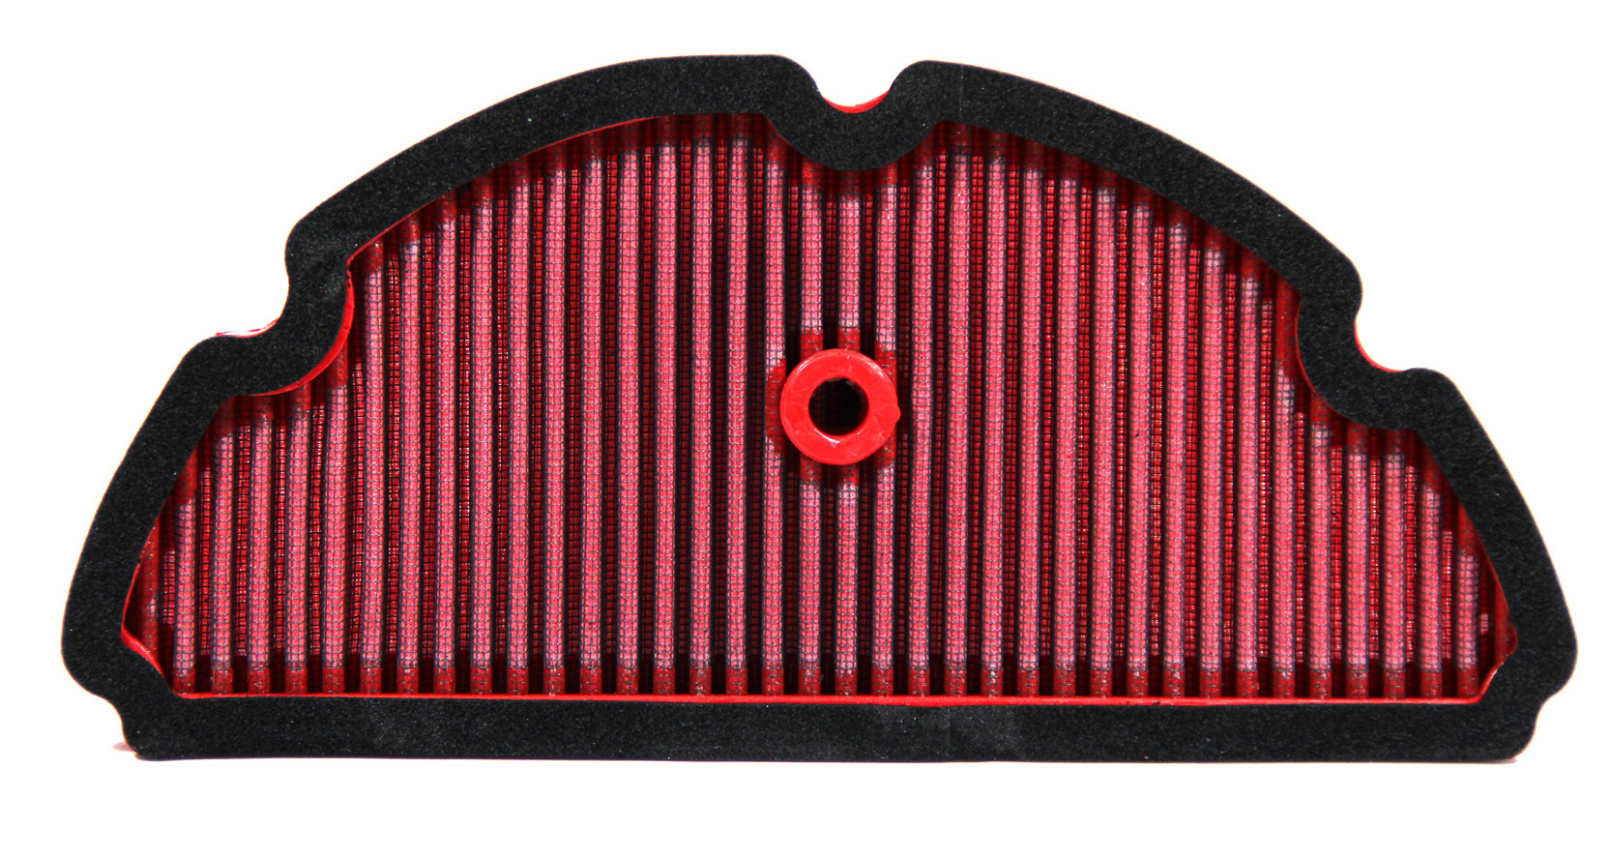 BMC Air Filter fits for Benelli BN 600 13-16 Bikes - Durian Bikers